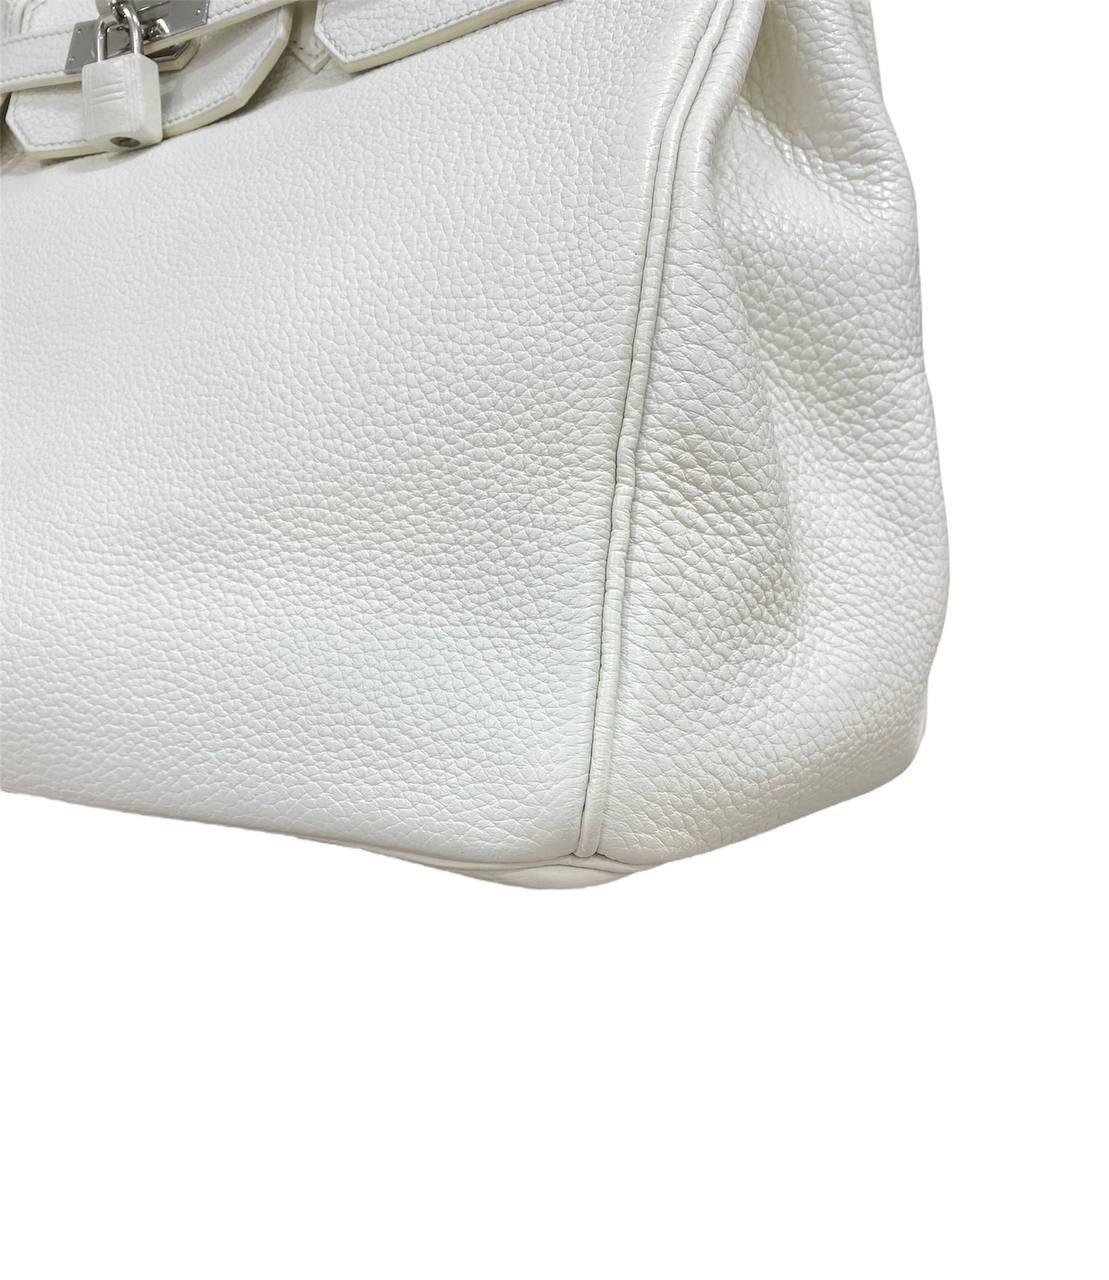 2011 Hermès Birkin 40 White Clemence Leather Top Handle Bag  For Sale 4